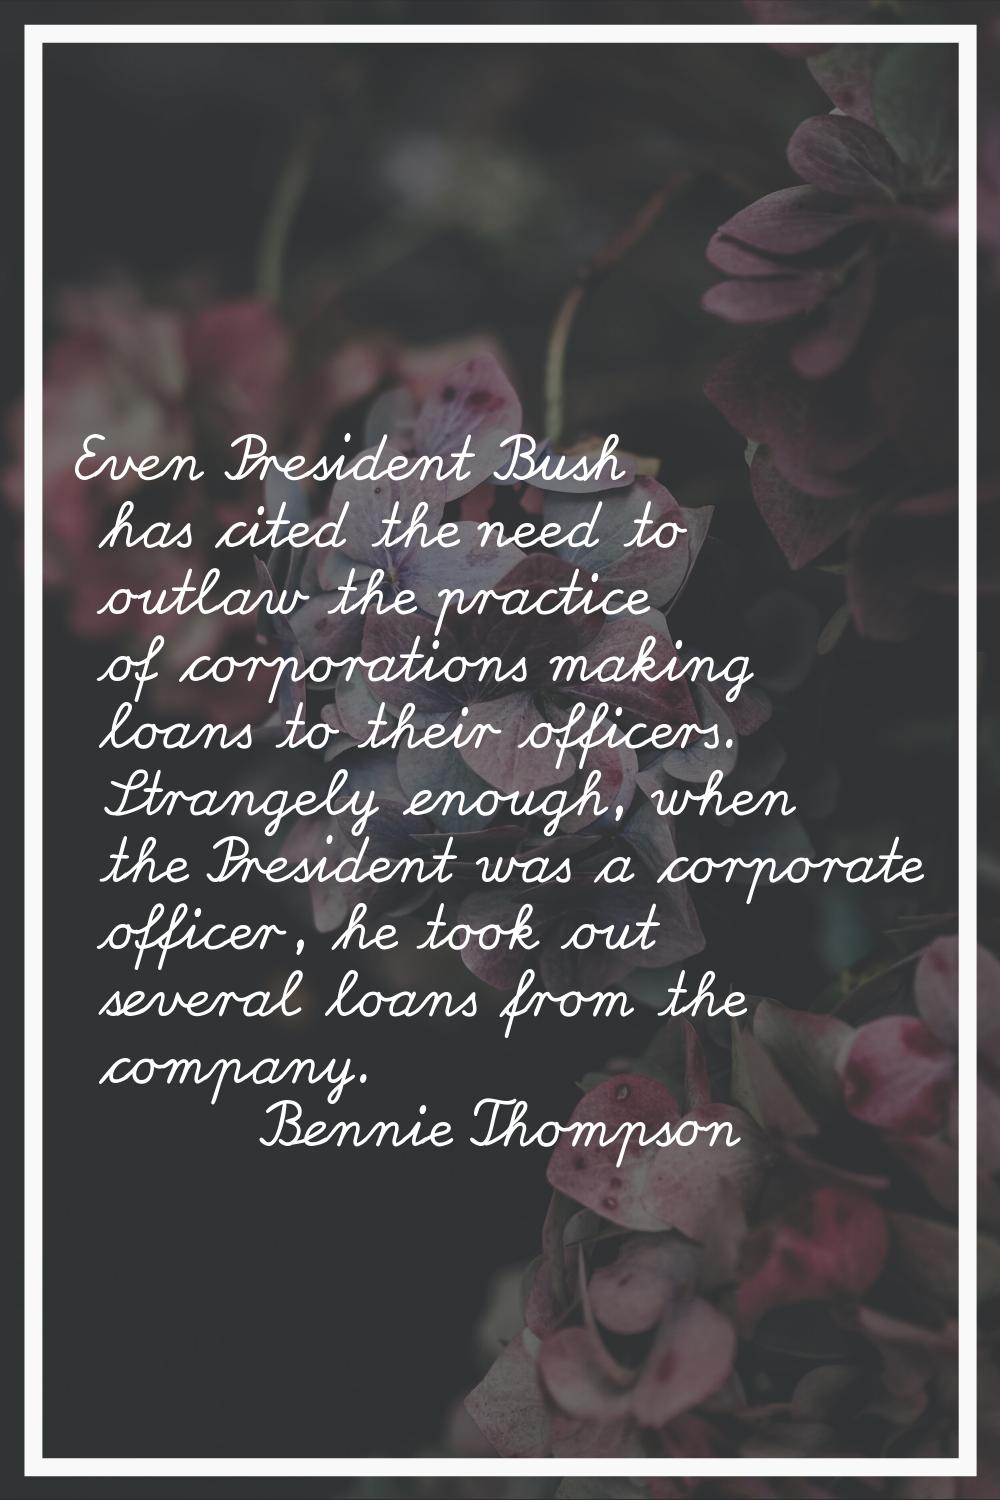 Even President Bush has cited the need to outlaw the practice of corporations making loans to their